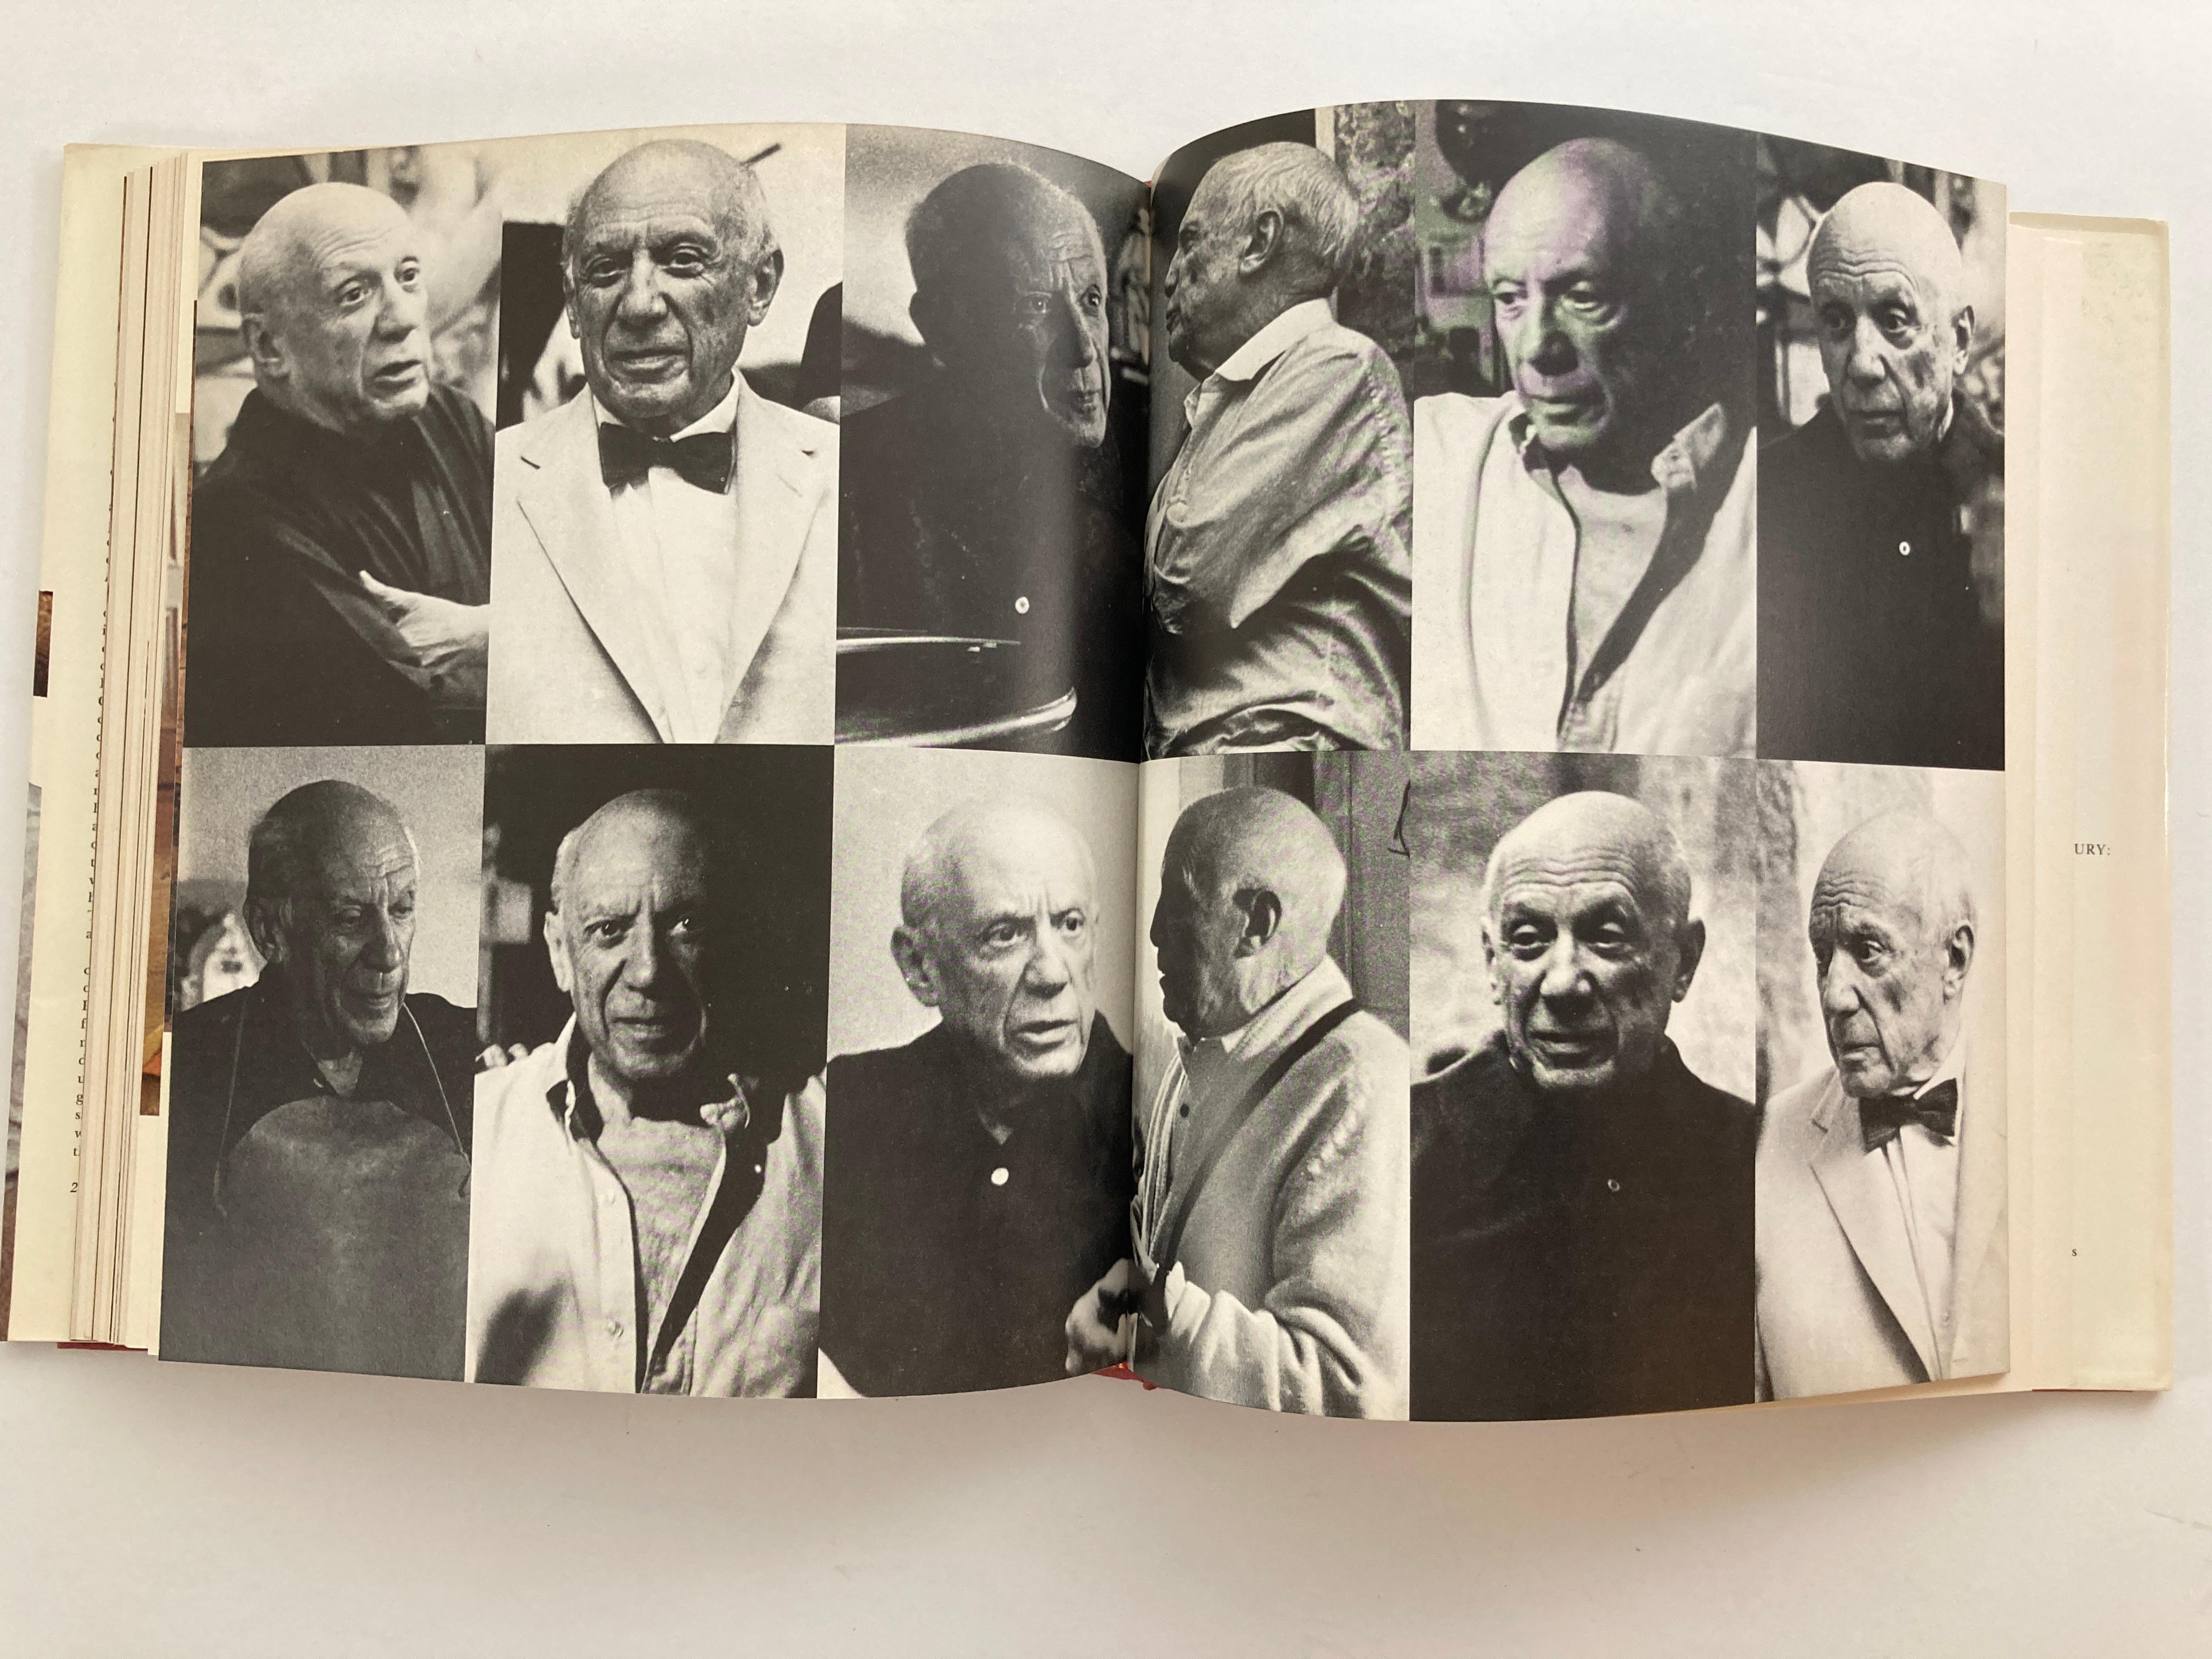 Forever Picasso An Intimate Look at His Last Years Book by Roberto Otero 5